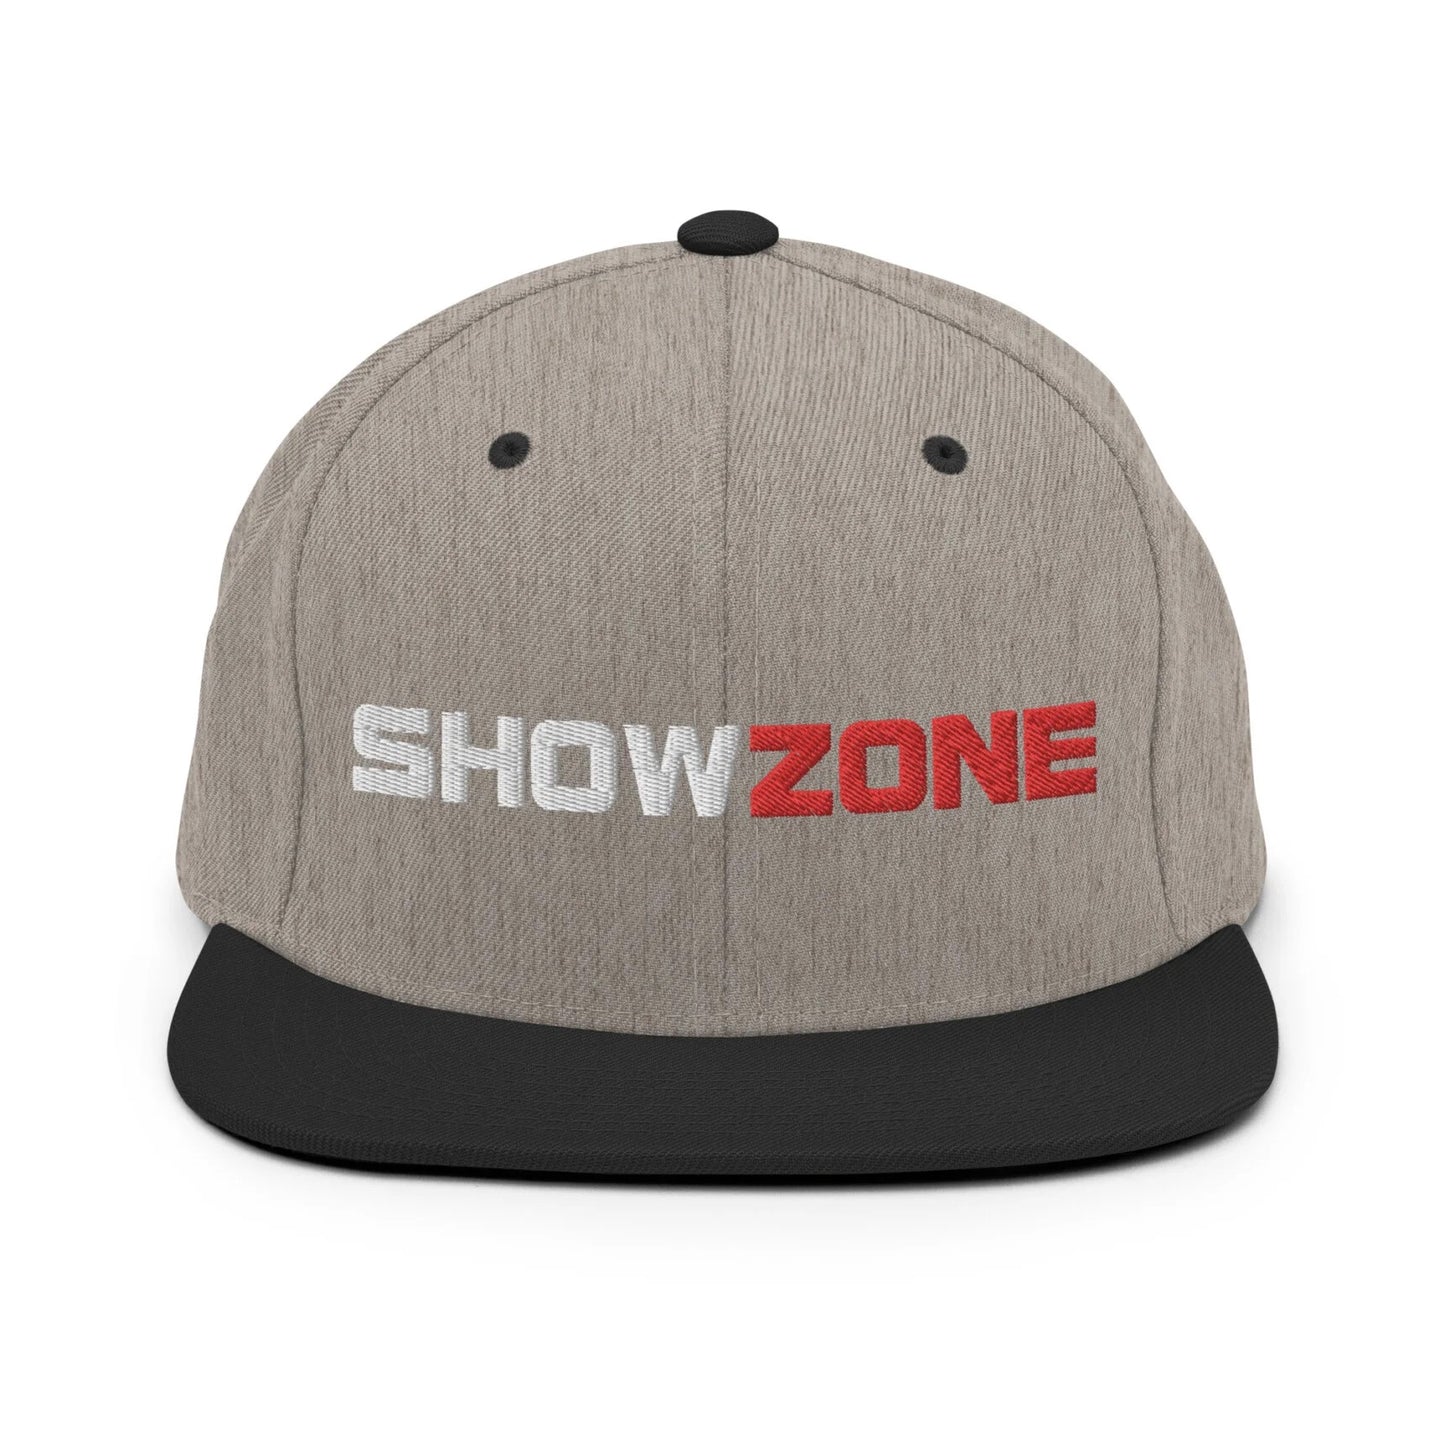 ShowZone snapback hat in heather grey with text logo and black brim accents